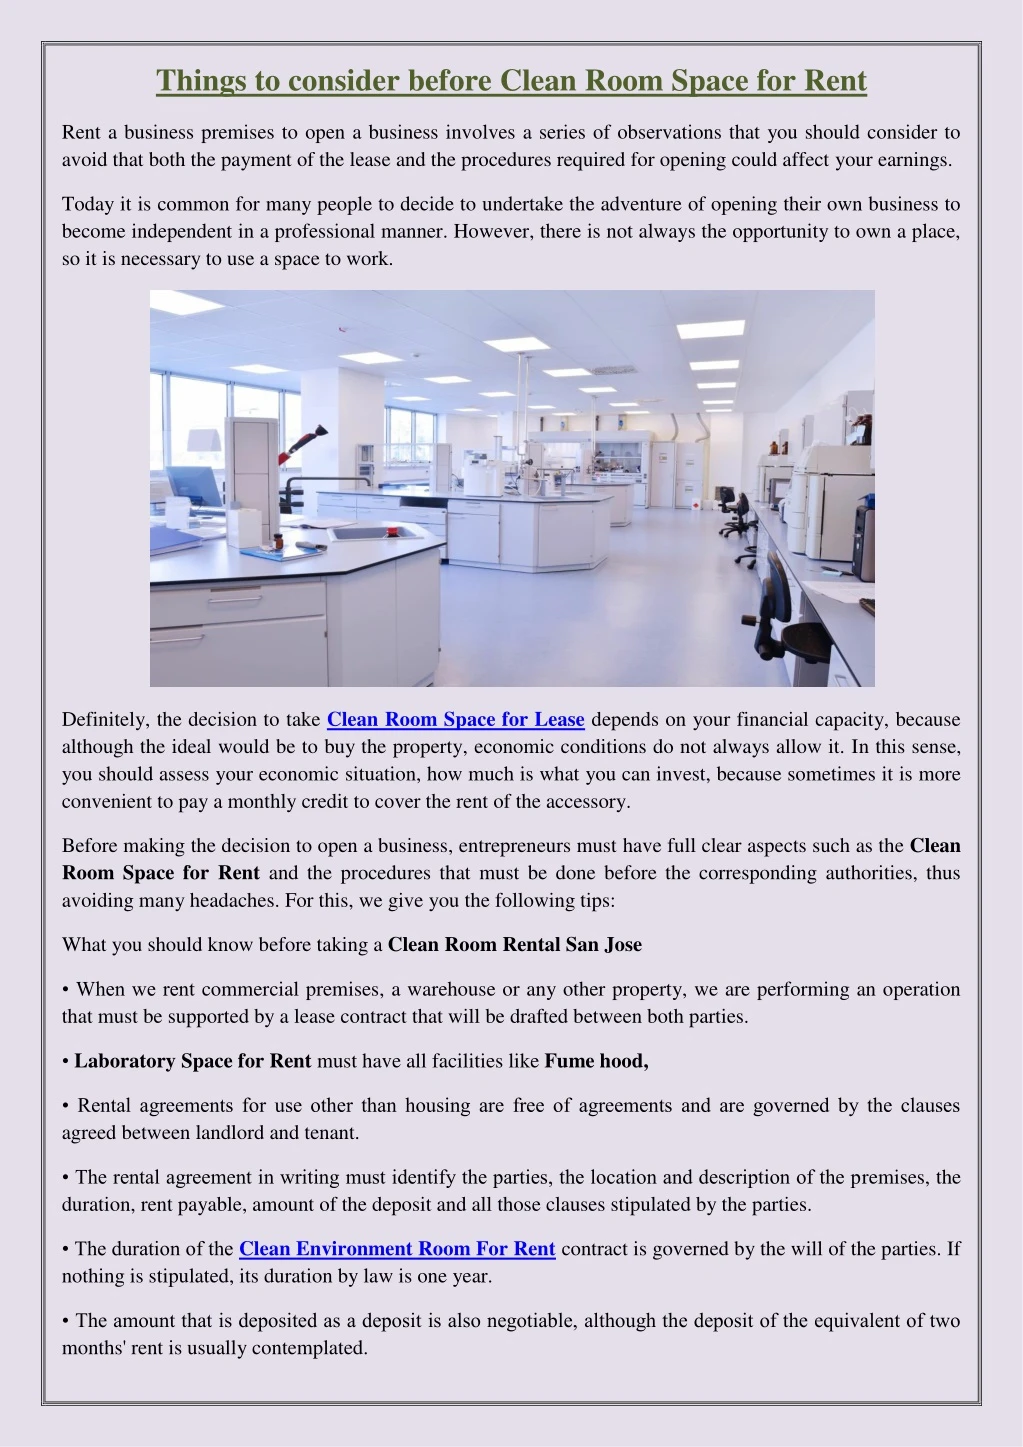 things to consider before clean room space